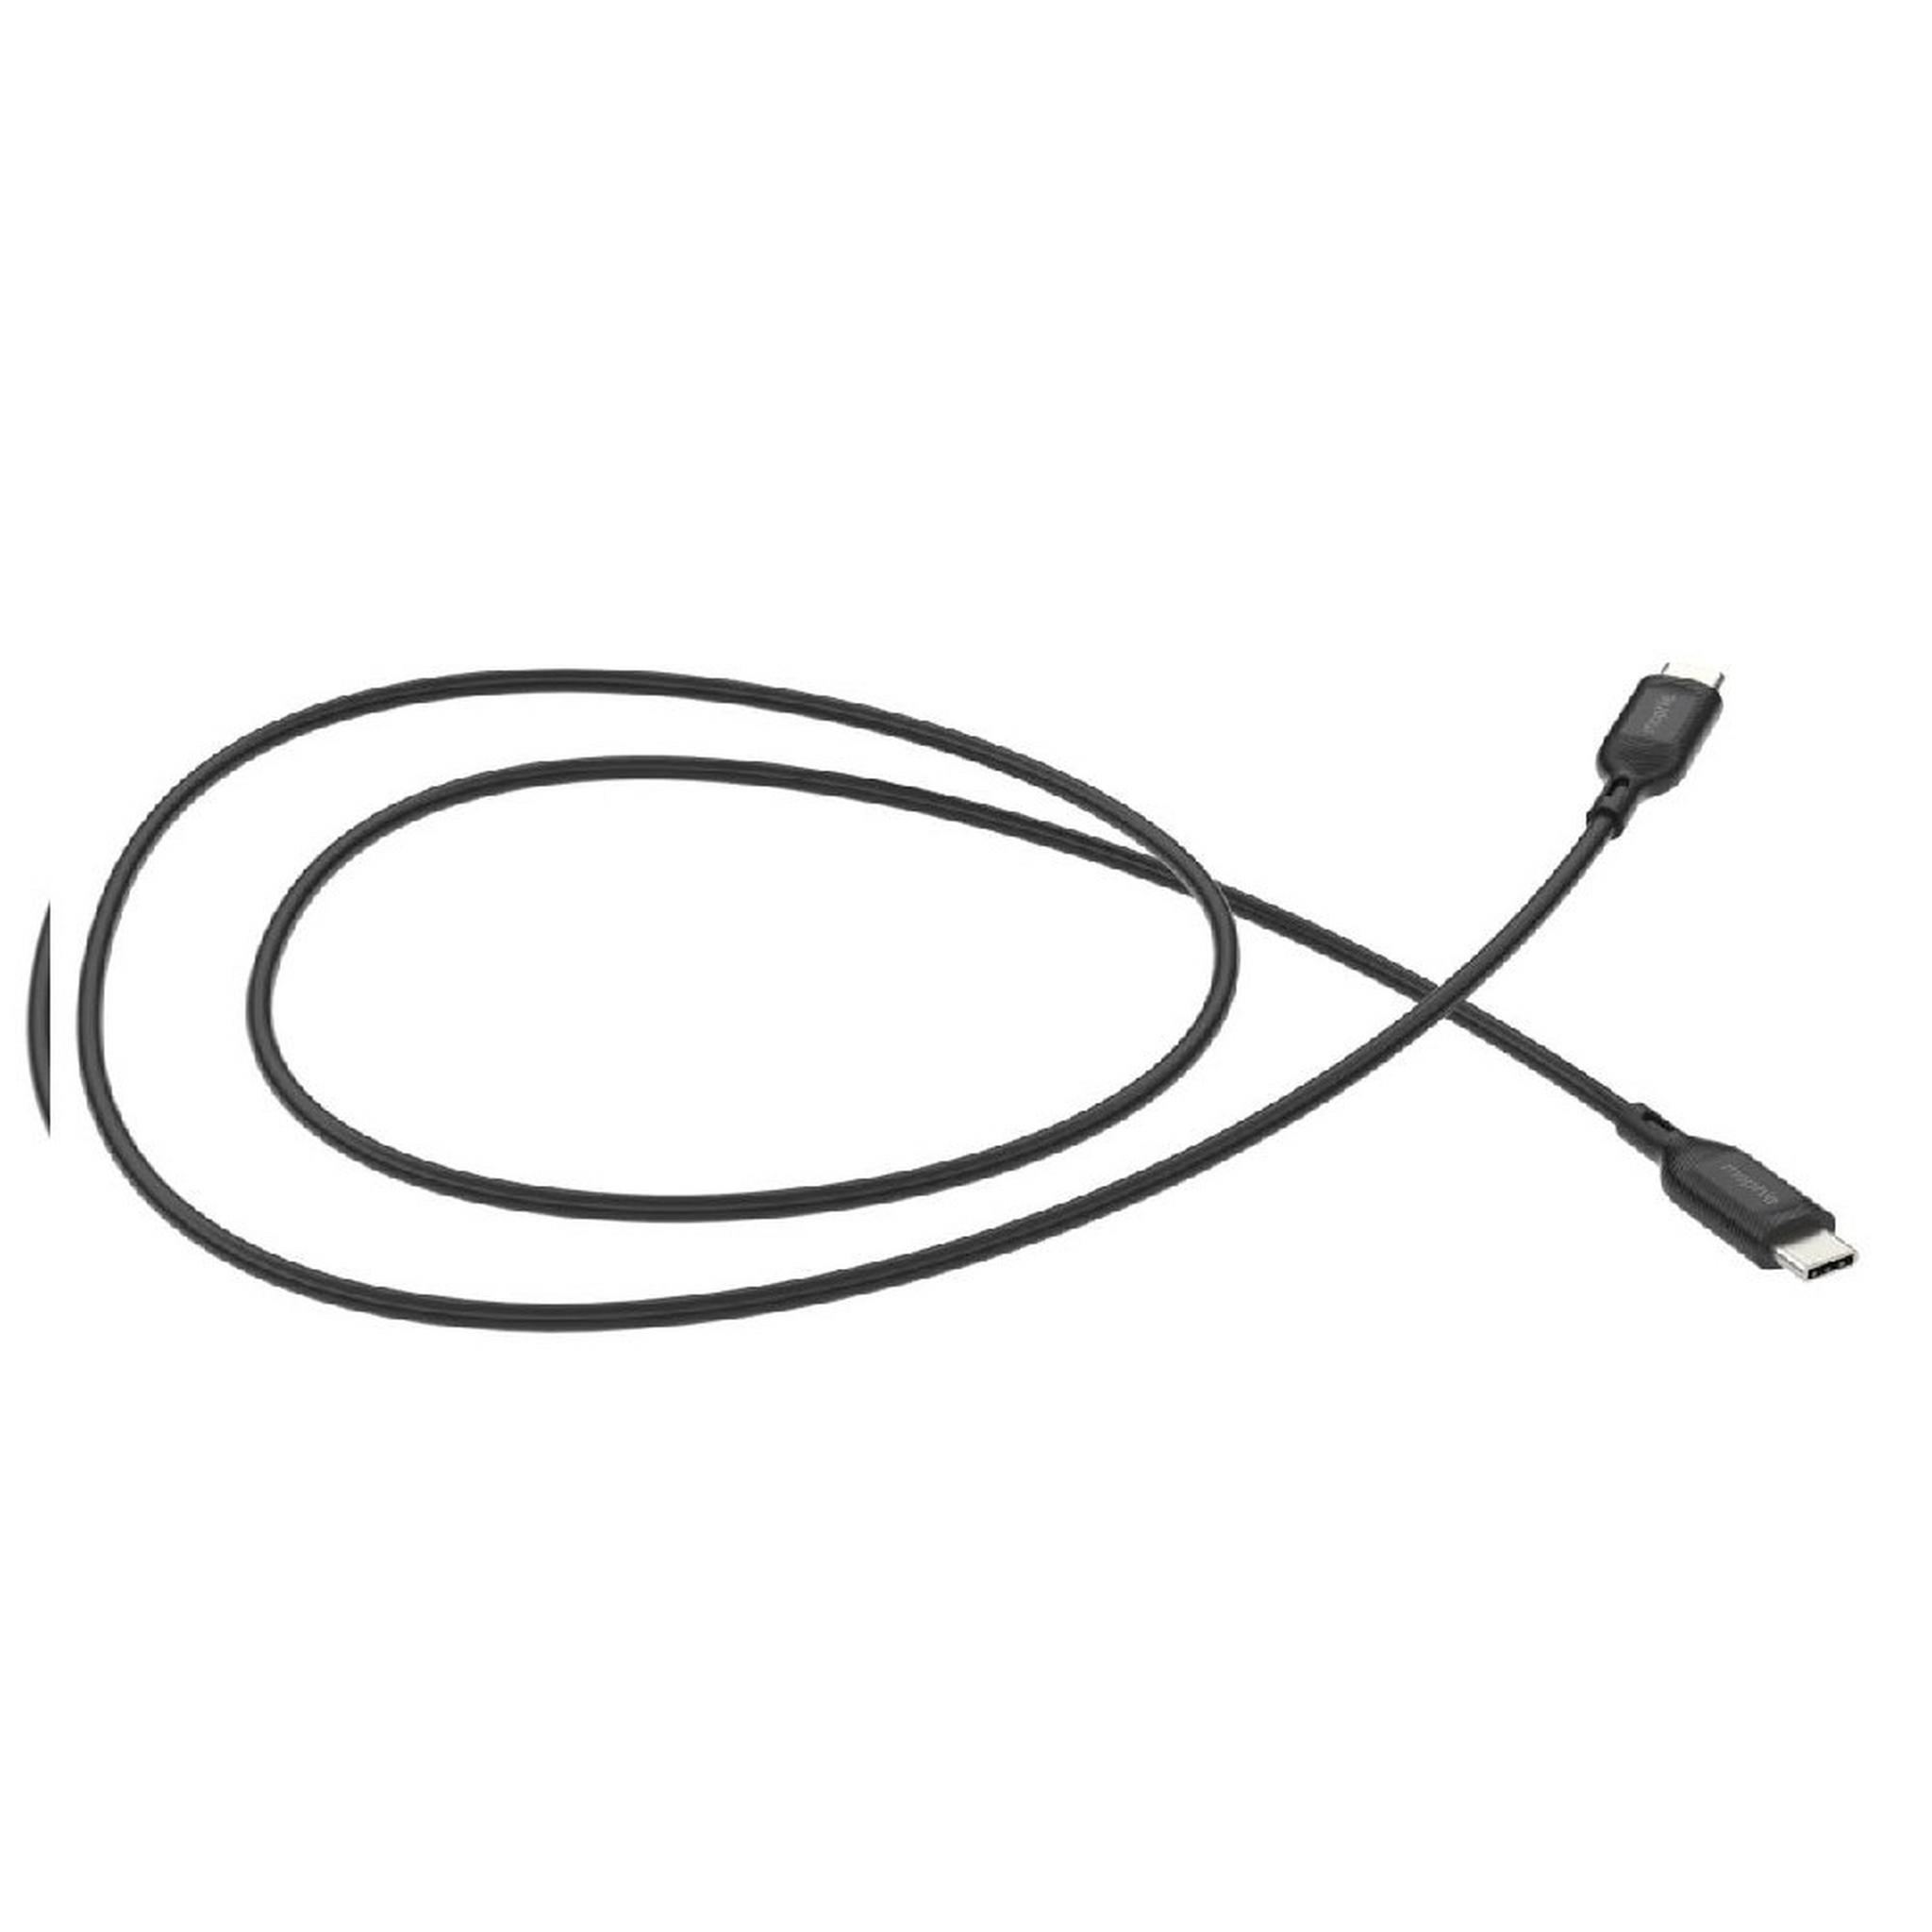 Mophie USB-C to USB-C Cable, 1M, 409911863 – Black